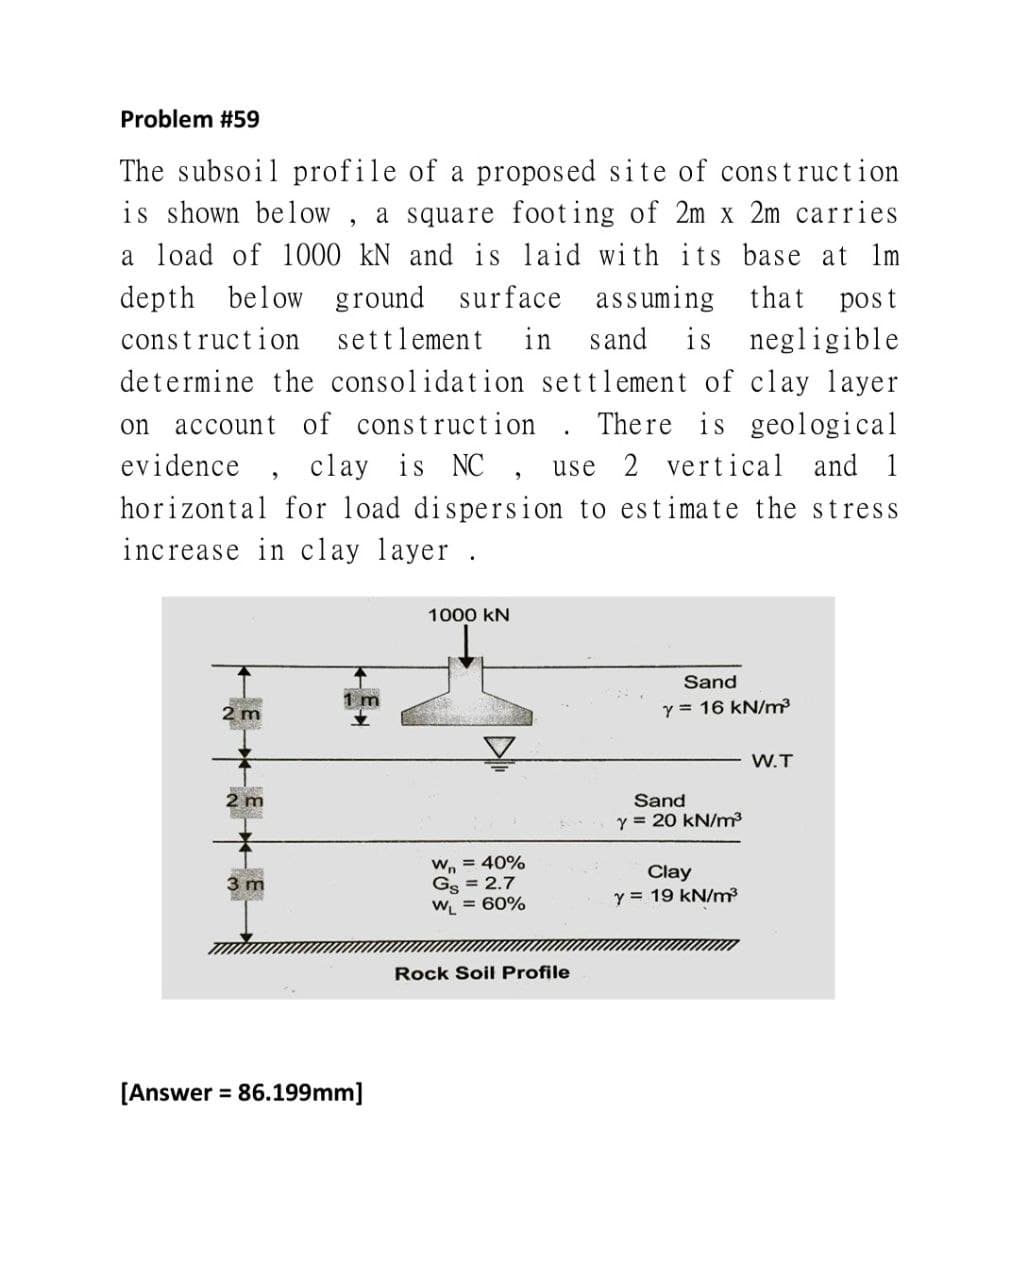 Problem #59
The subsoil profile of a proposed site of construction
is shown below, a square footing of 2m x 2m carries
a load of 1000 kN and is laid with its base at lm
depth below ground surface assuming that post
construction settlement in sand is negligible
determine the consolidation settlement of clay layer
on account of construction. There is geological
evidence, clay is NC, use 2 vertical and 1
horizontal for load dispersion to estimate the stress
increase in clay layer.
1000 KN
Sand
Y 16 kN/m³
2 m
W.T
Wn = 40%
GS = 2.7
W₁ = 60%
Rock Soil Profile
2 m
3 m
[Answer = 86.199mm]
Sand
Y = 20 kN/m³
Clay
y 19 kN/m³